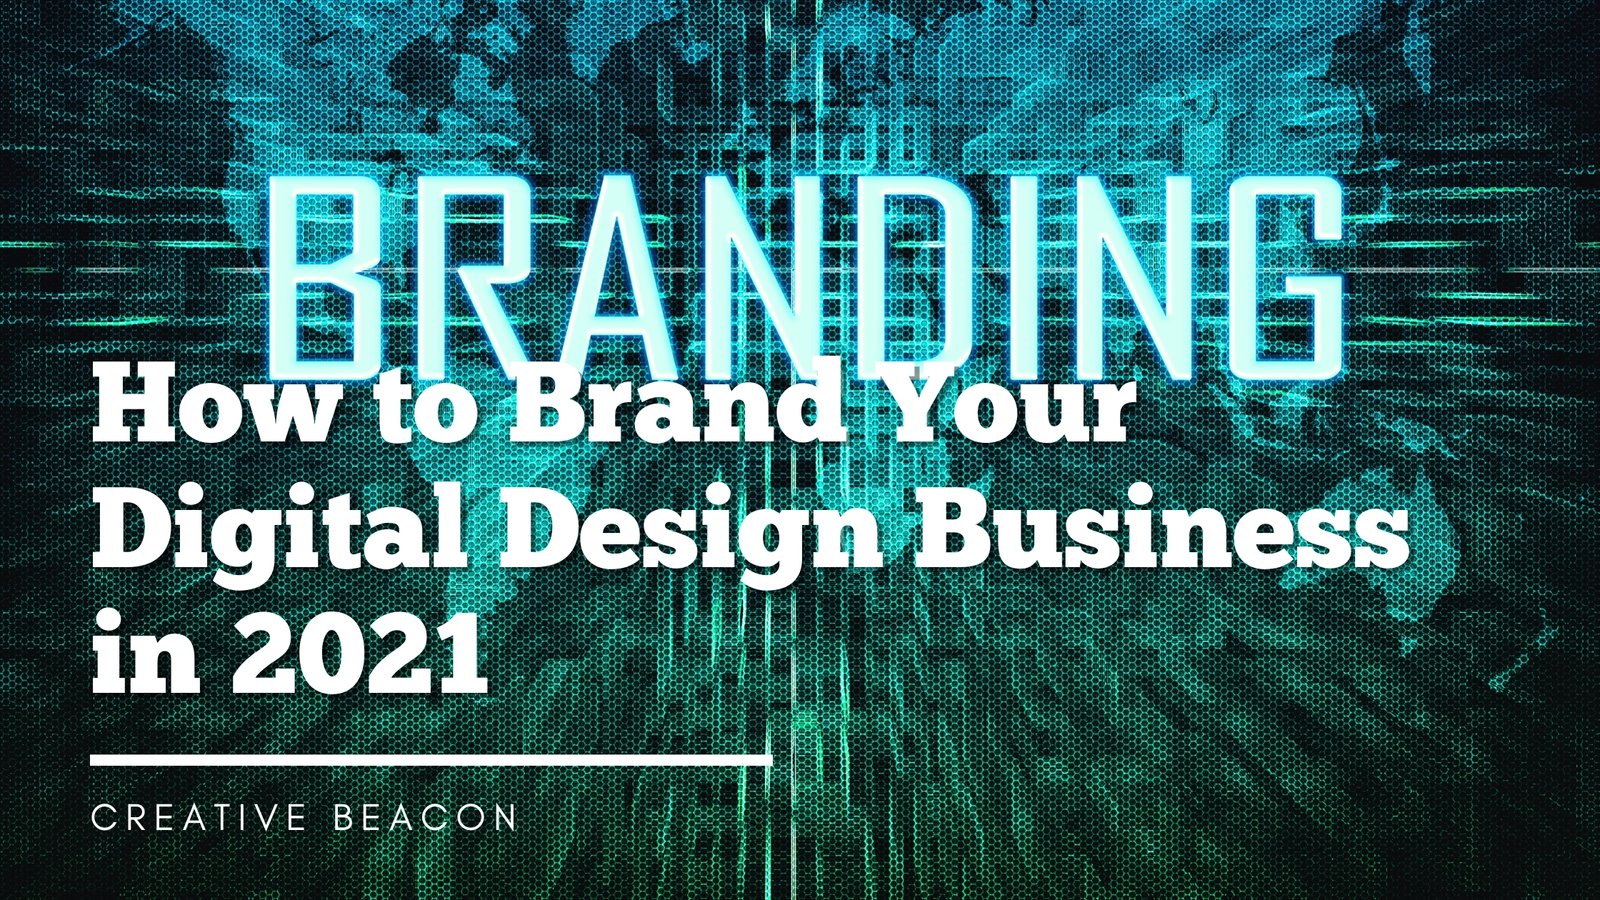 How to Brand Your Digital Design Business in 2021